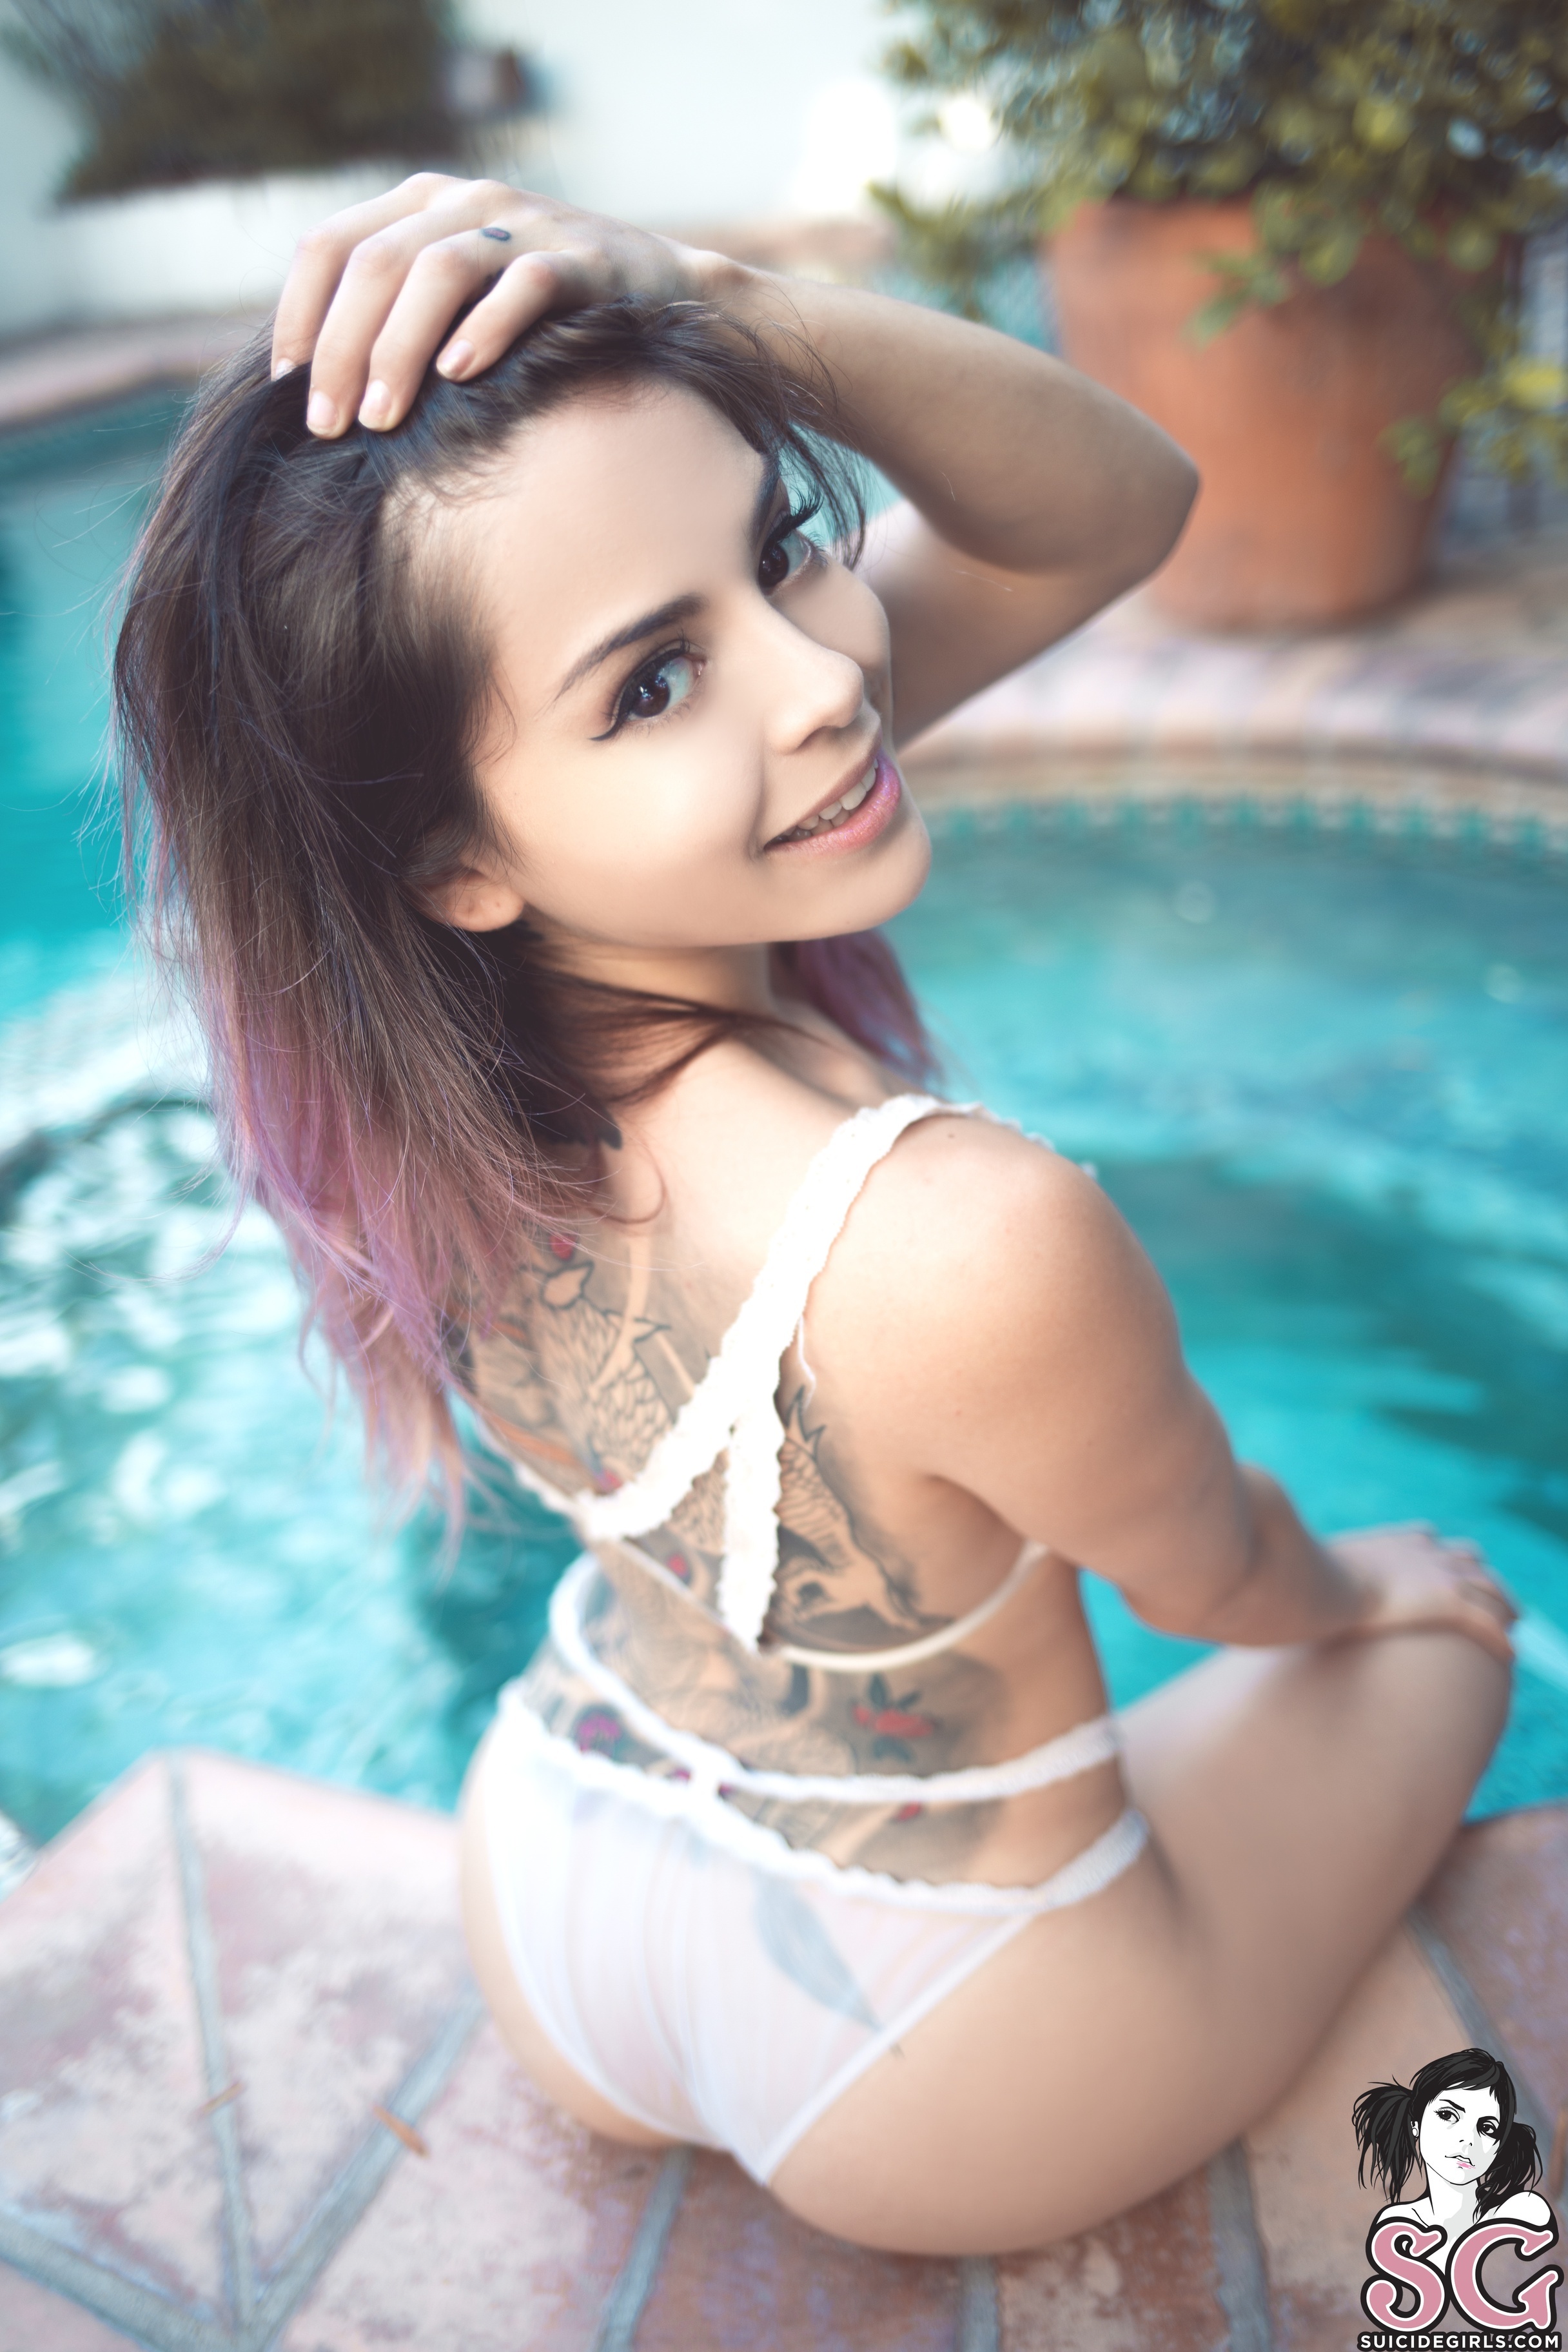 People 2432x3648 Satin Suicide Suicide Girls women model tattoo swimming pool back see-through panties white thong sensual gaze smiling petite looking at viewer hands in hair brunette portrait display watermarked